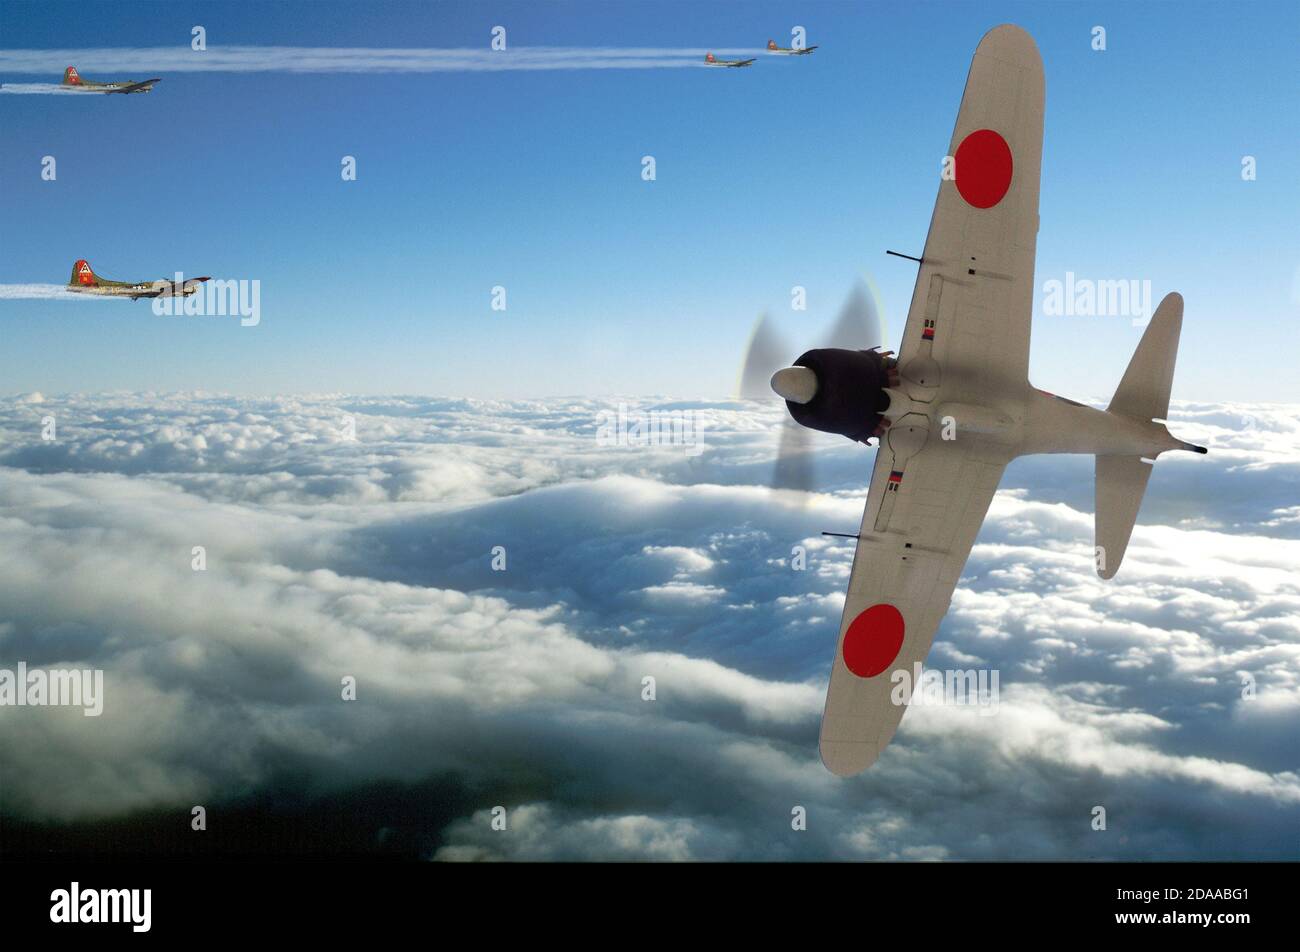 World War Two Japanese A6M Zero fighter aircraft scenario using plastic models and Photoshop Stock Photo